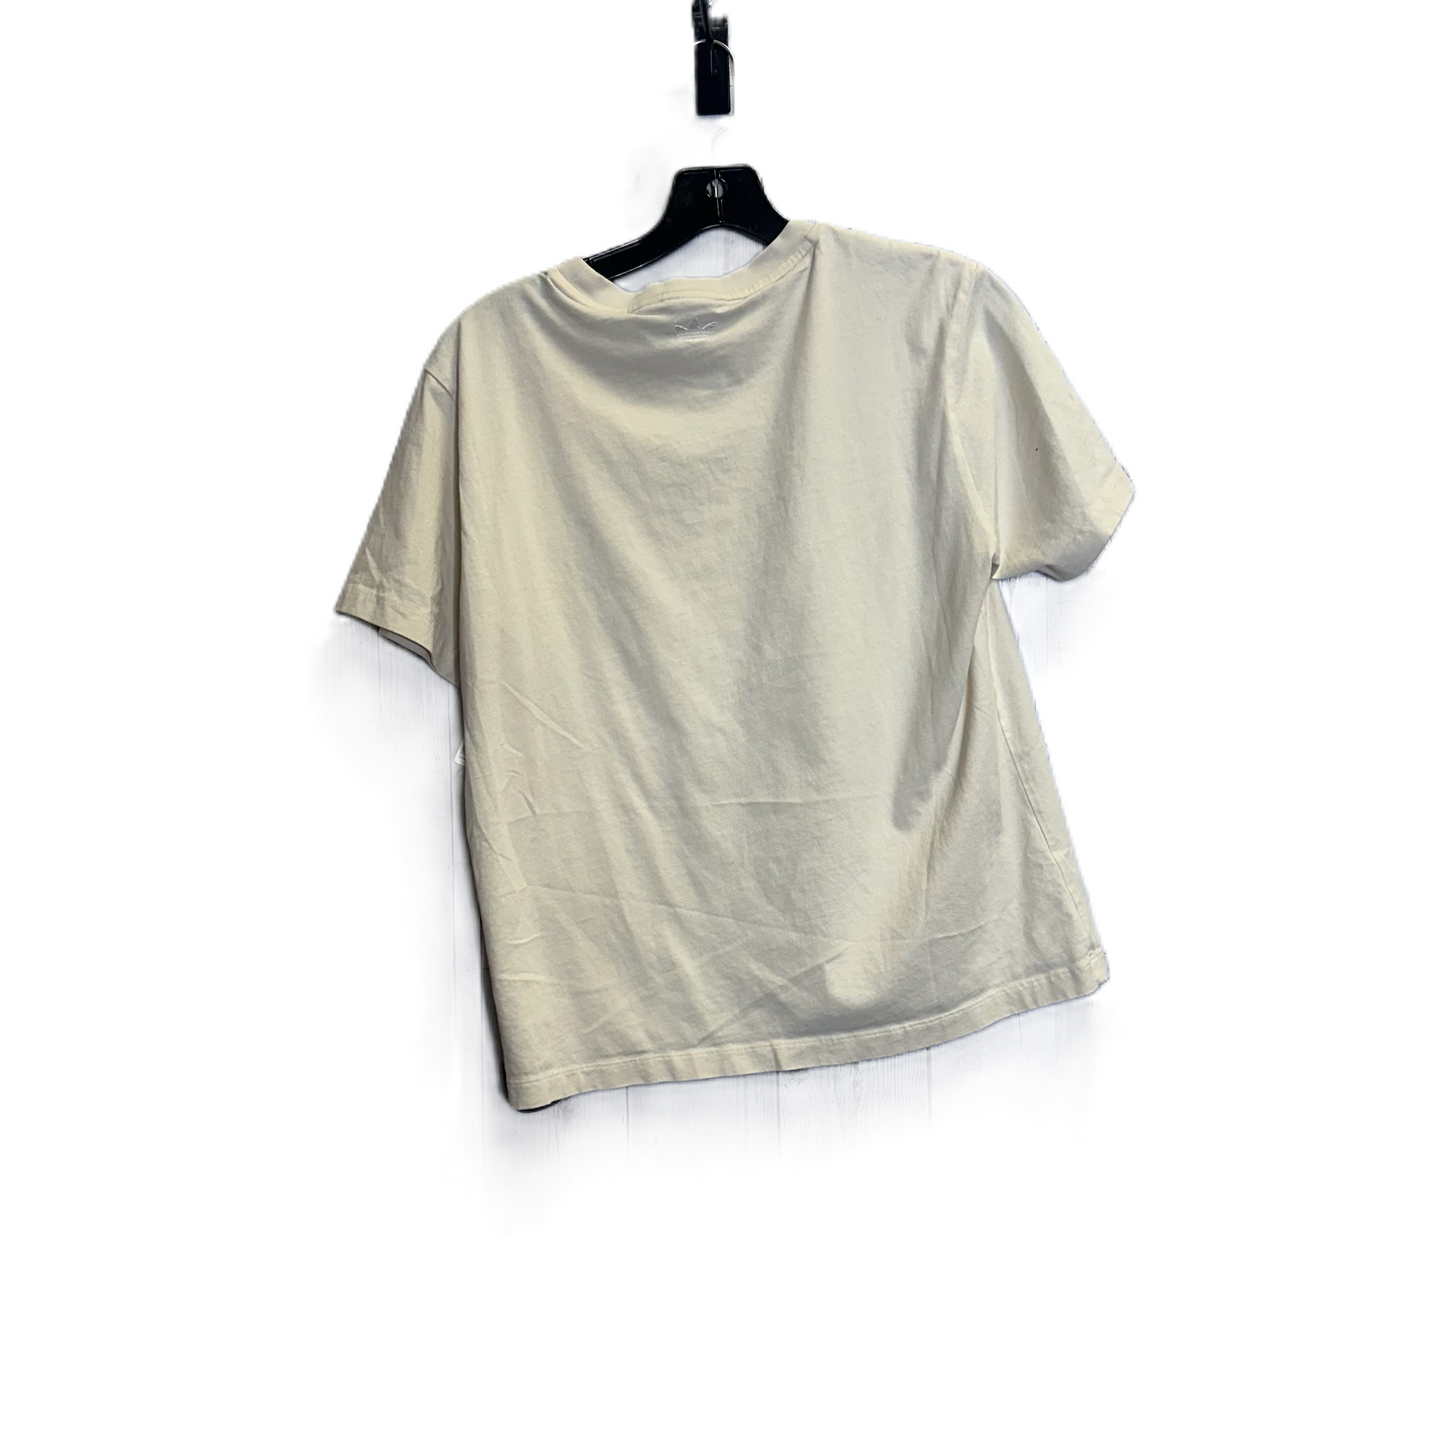 Cream Athletic Top Short Sleeve By Adidas, Size: M